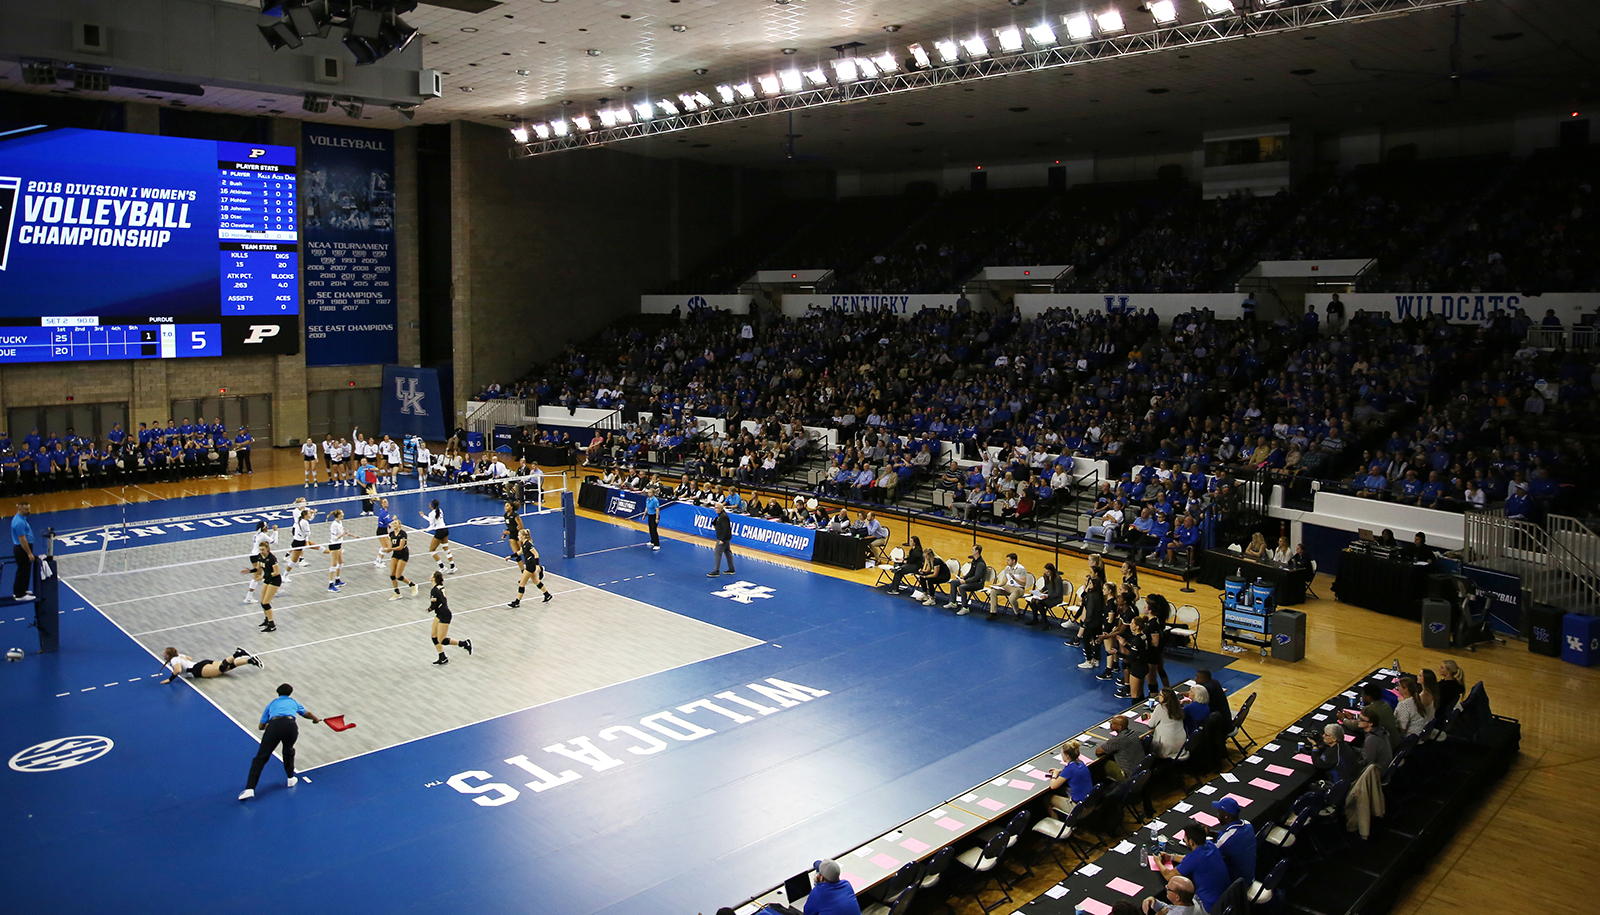 Watch Party for NCAA Volleyball Championship Saturday at Memorial Coliseum